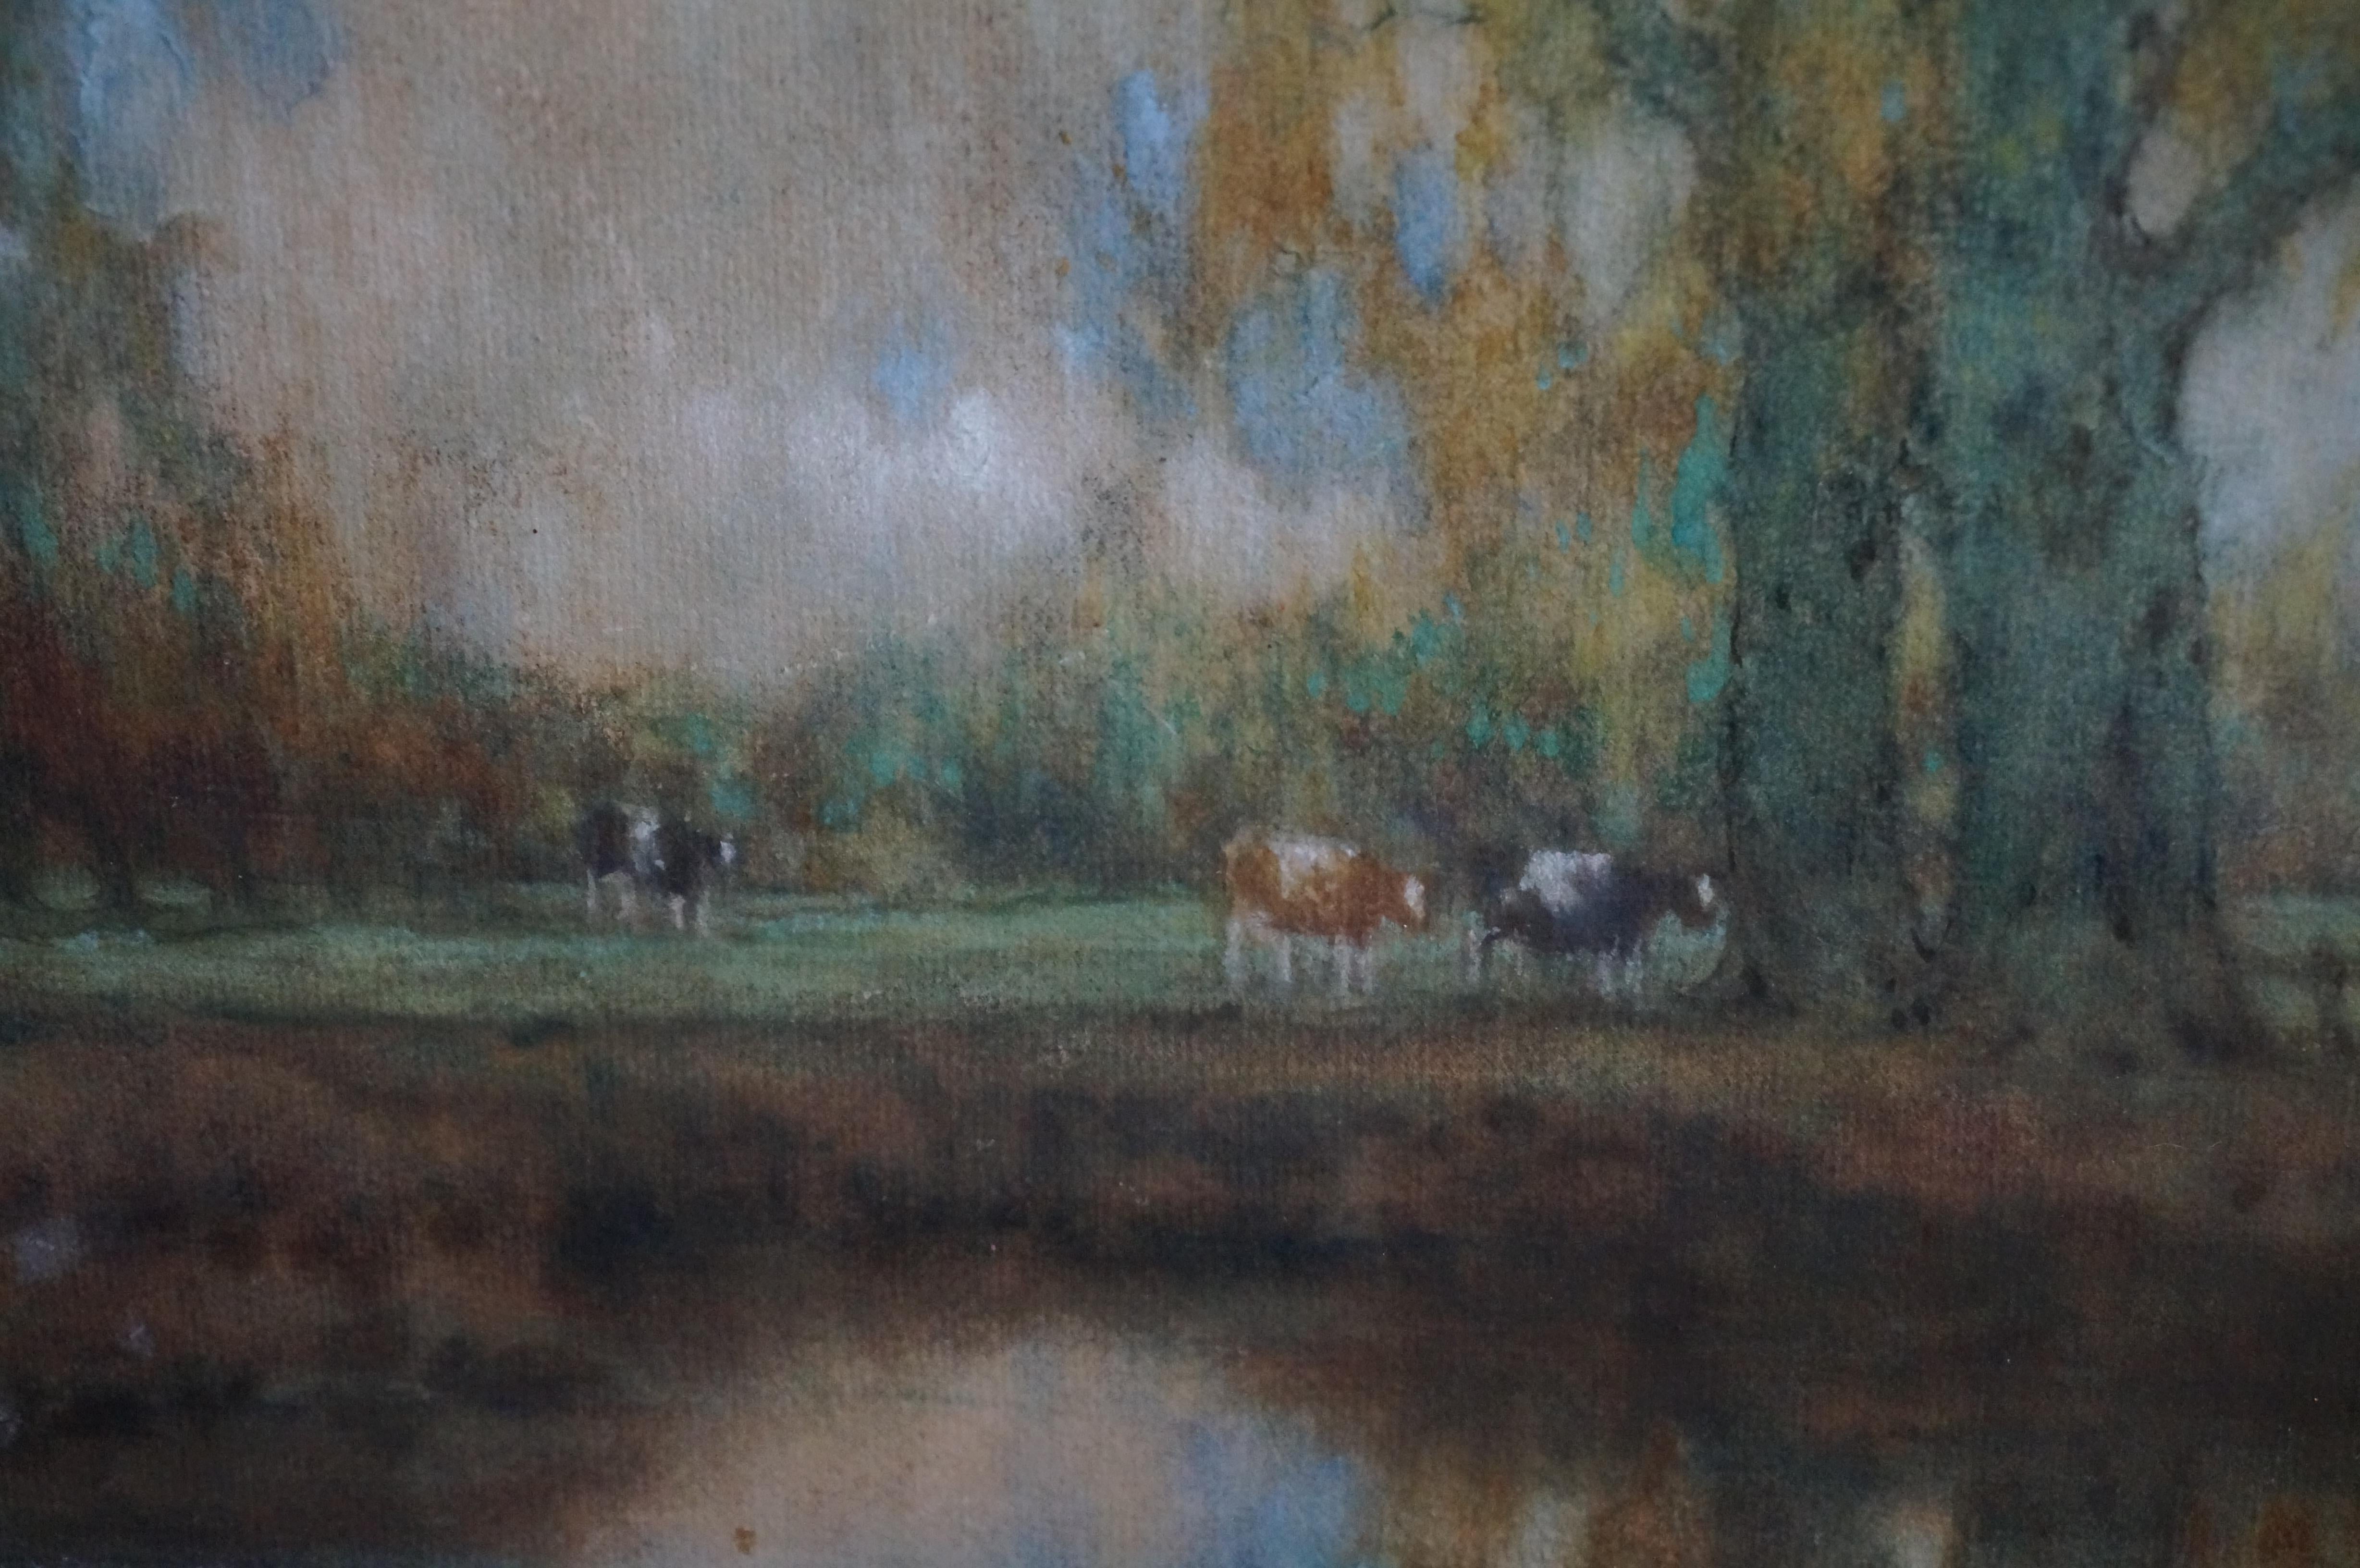 Watercolor on paper depicting a Dutch landscape (East of The Netherlands) with grazing cows at the edge of a forest, by A. M. Gorter (1866 - 1933).
Dimensions incl. frame: 60 x 72 cm.
Dimensions excl. frame: 41 x 55 cm.
In gilt frame with glass.

In